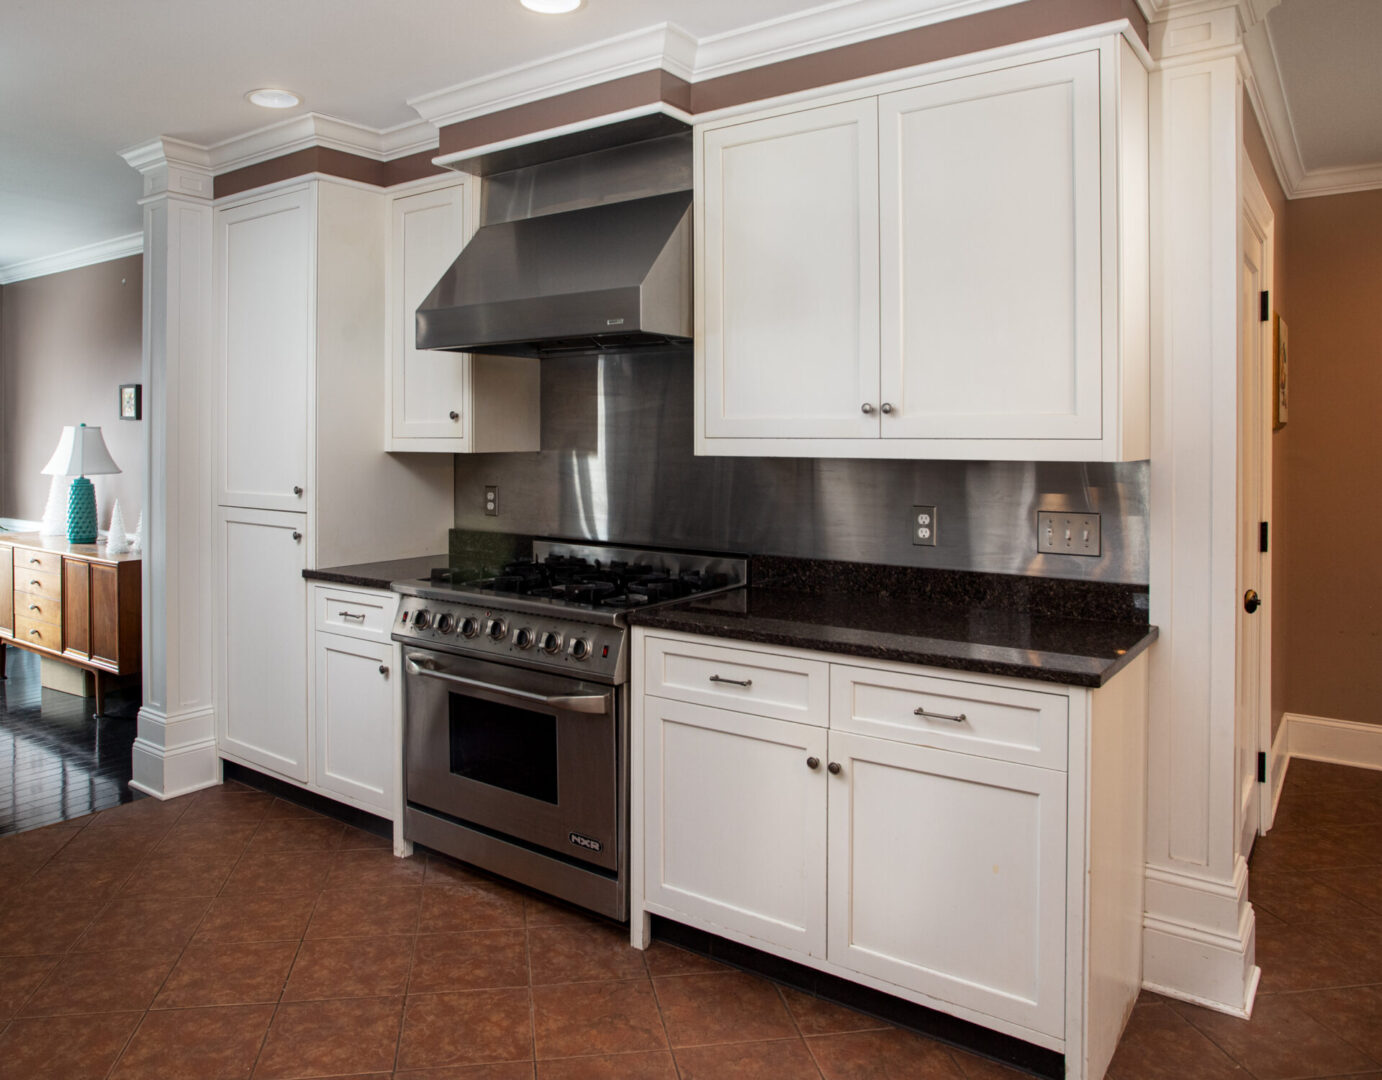 View of kitchen with white cabinet and stove